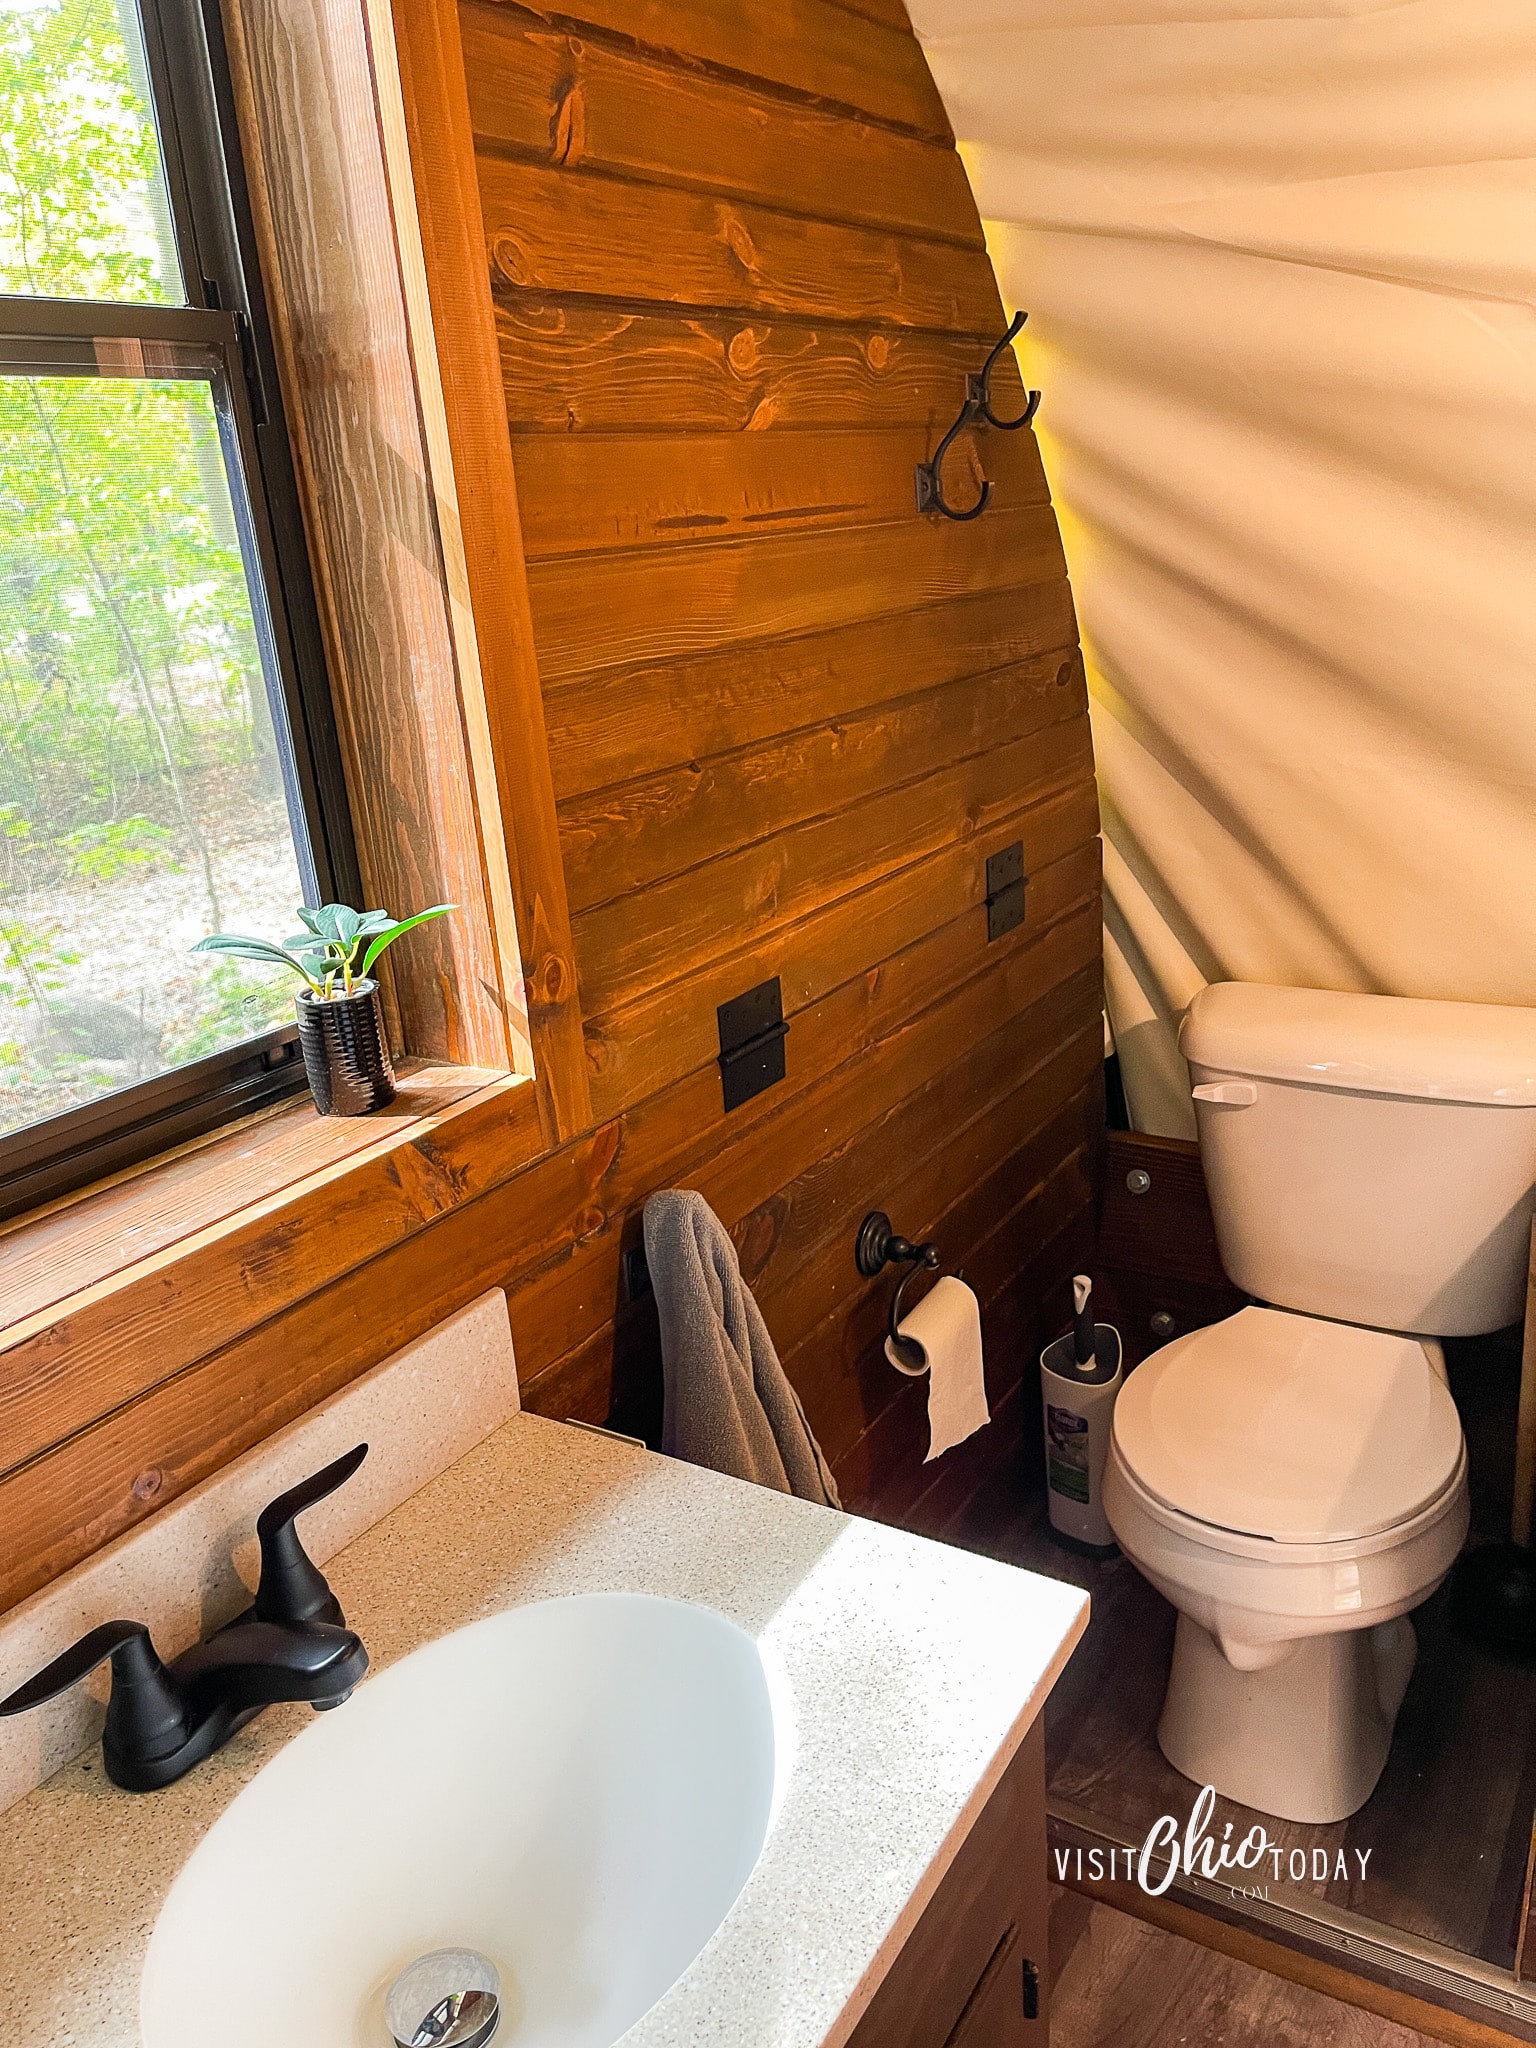 photos from inside the lux covered wagon at garystone ranch, a full working bathrooms, pictured a sink, window to outside where you can green tree leaves and a toilet Photo credit: Cindy Gordon of VisitOhioToday.com